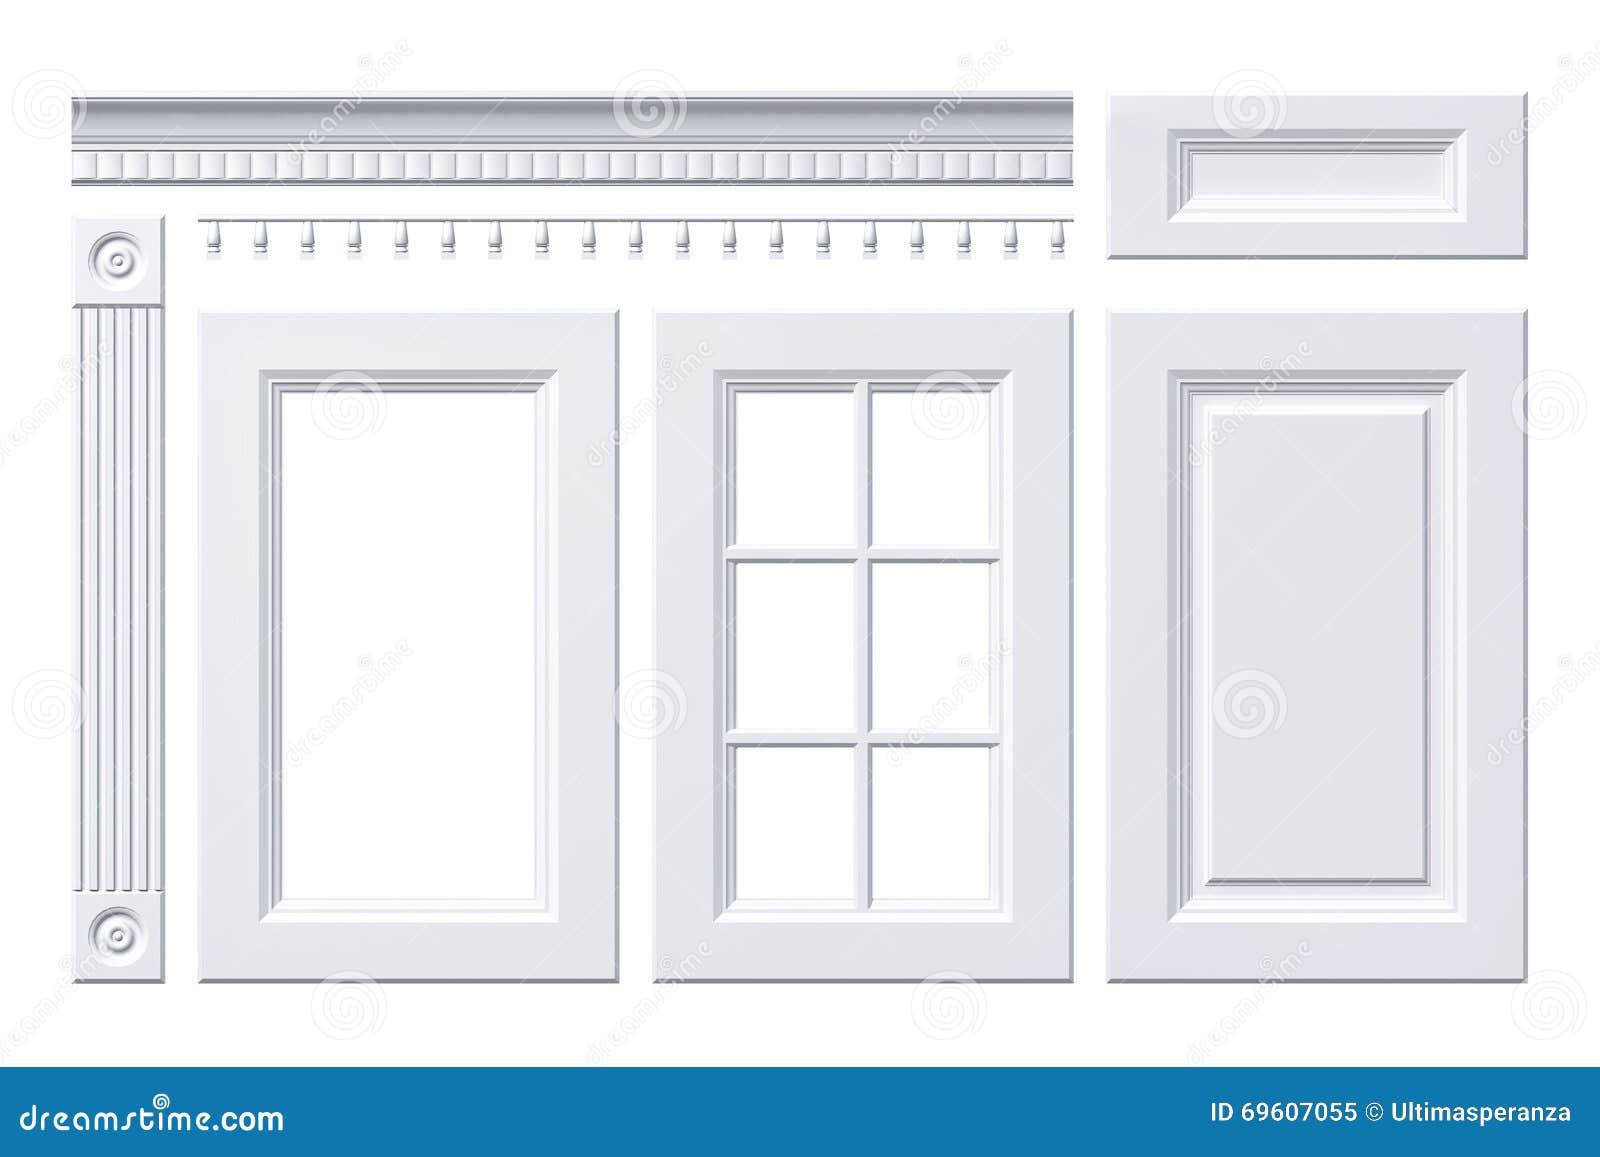 Front Door Drawer Column Cornice For Kitchen Cabinet Isolated